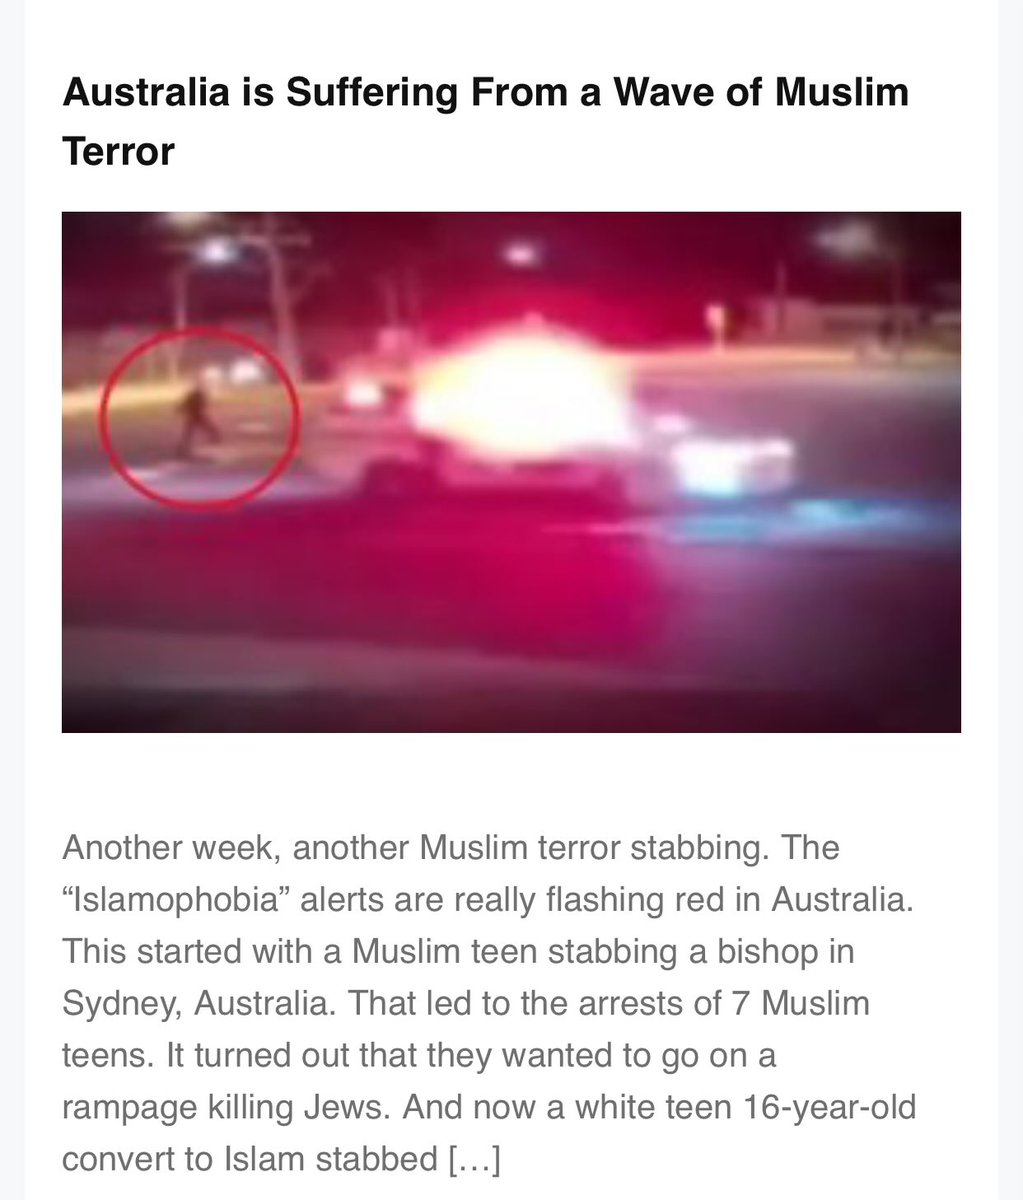 CMON
MUSLIMS AS TERRORISTS
THEY HAVE ALWAYS BEEN CREATING TERROR WHEREVER THEY END UP NOTHING NEW